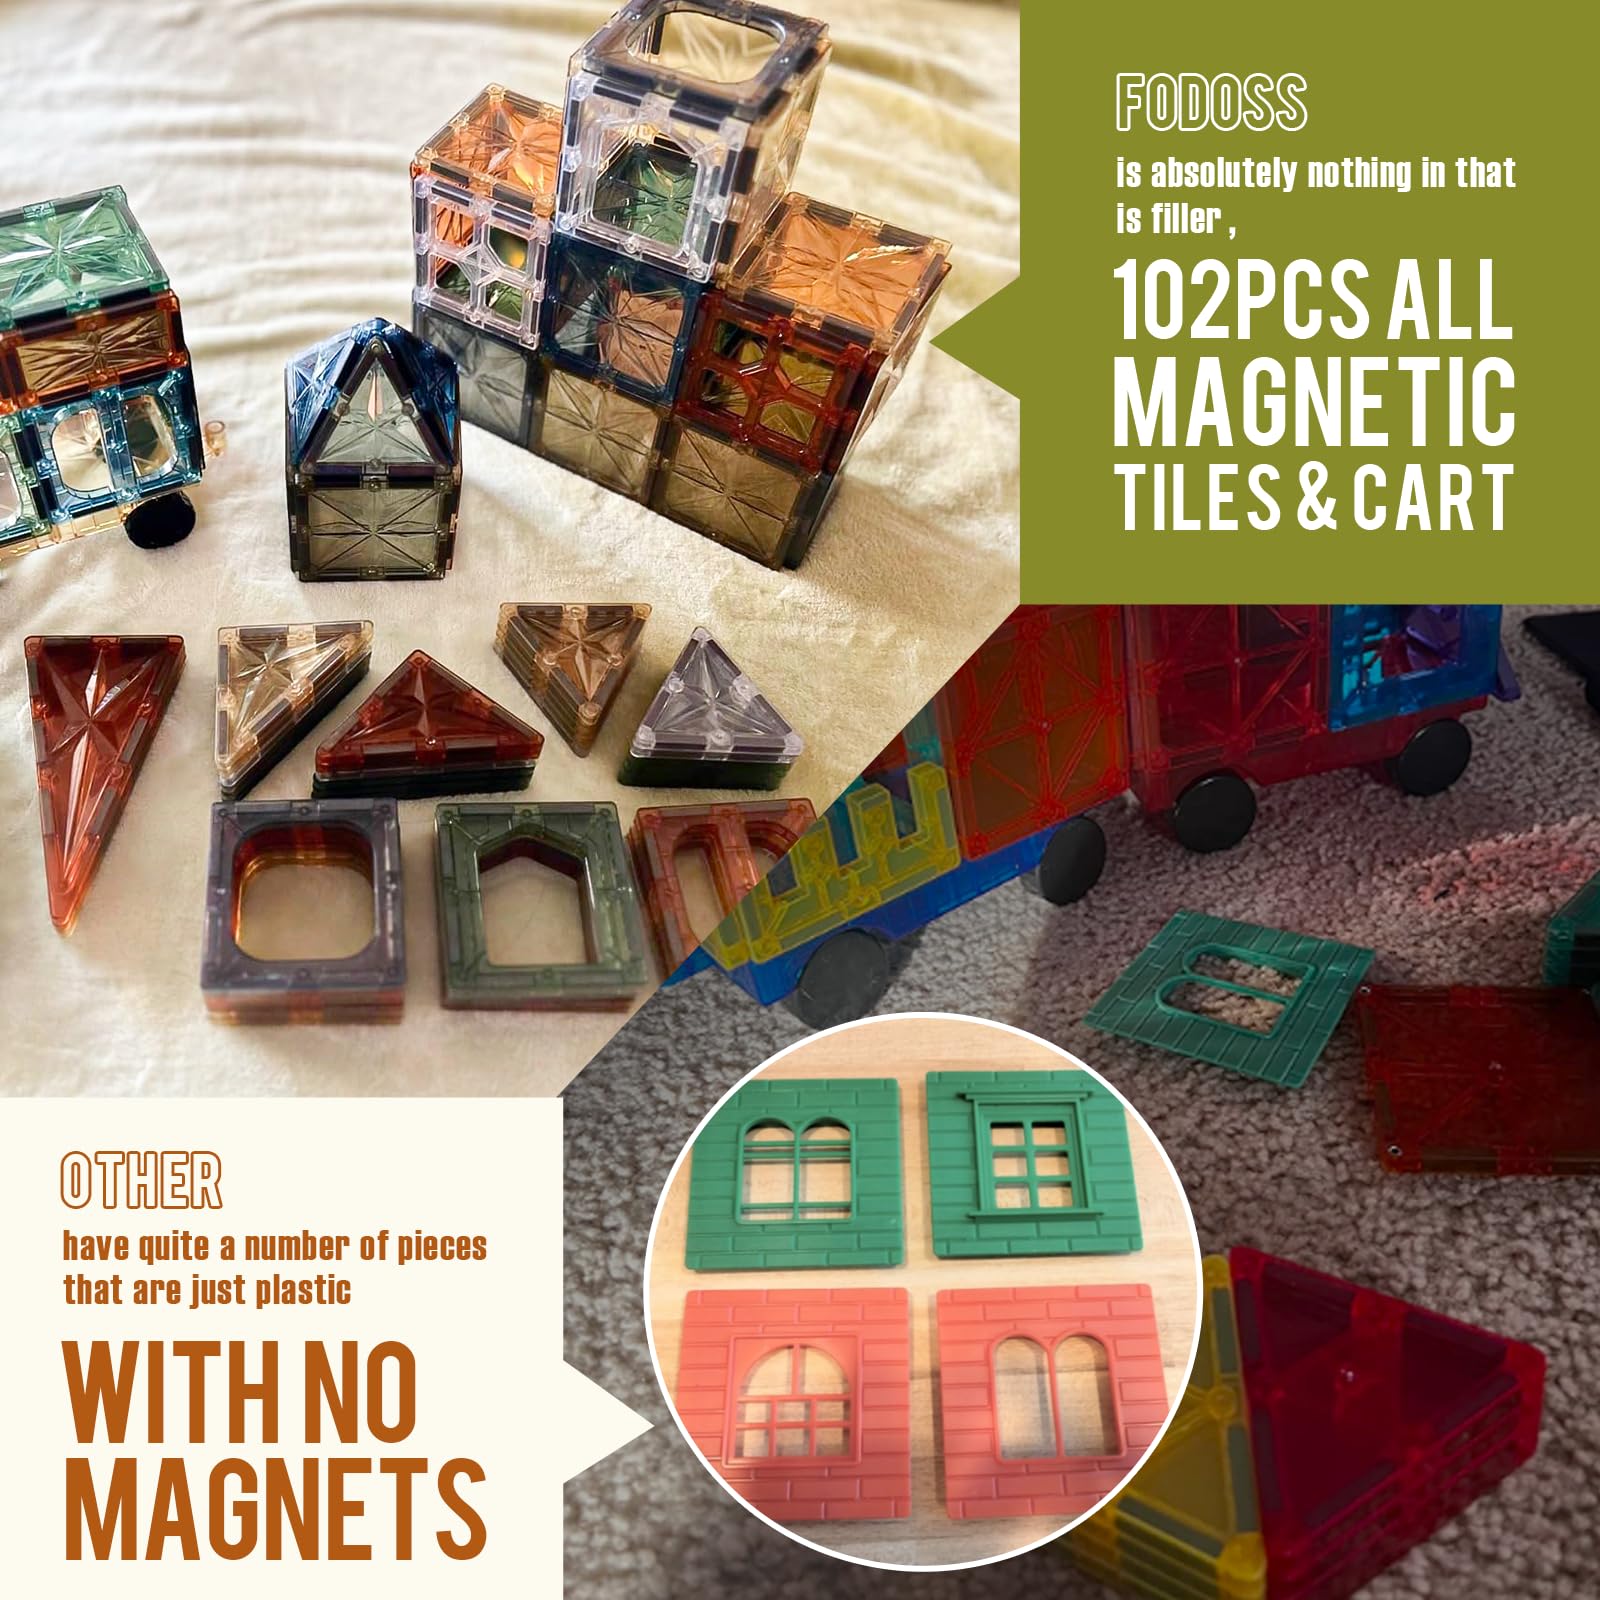 Magnetic Tiles